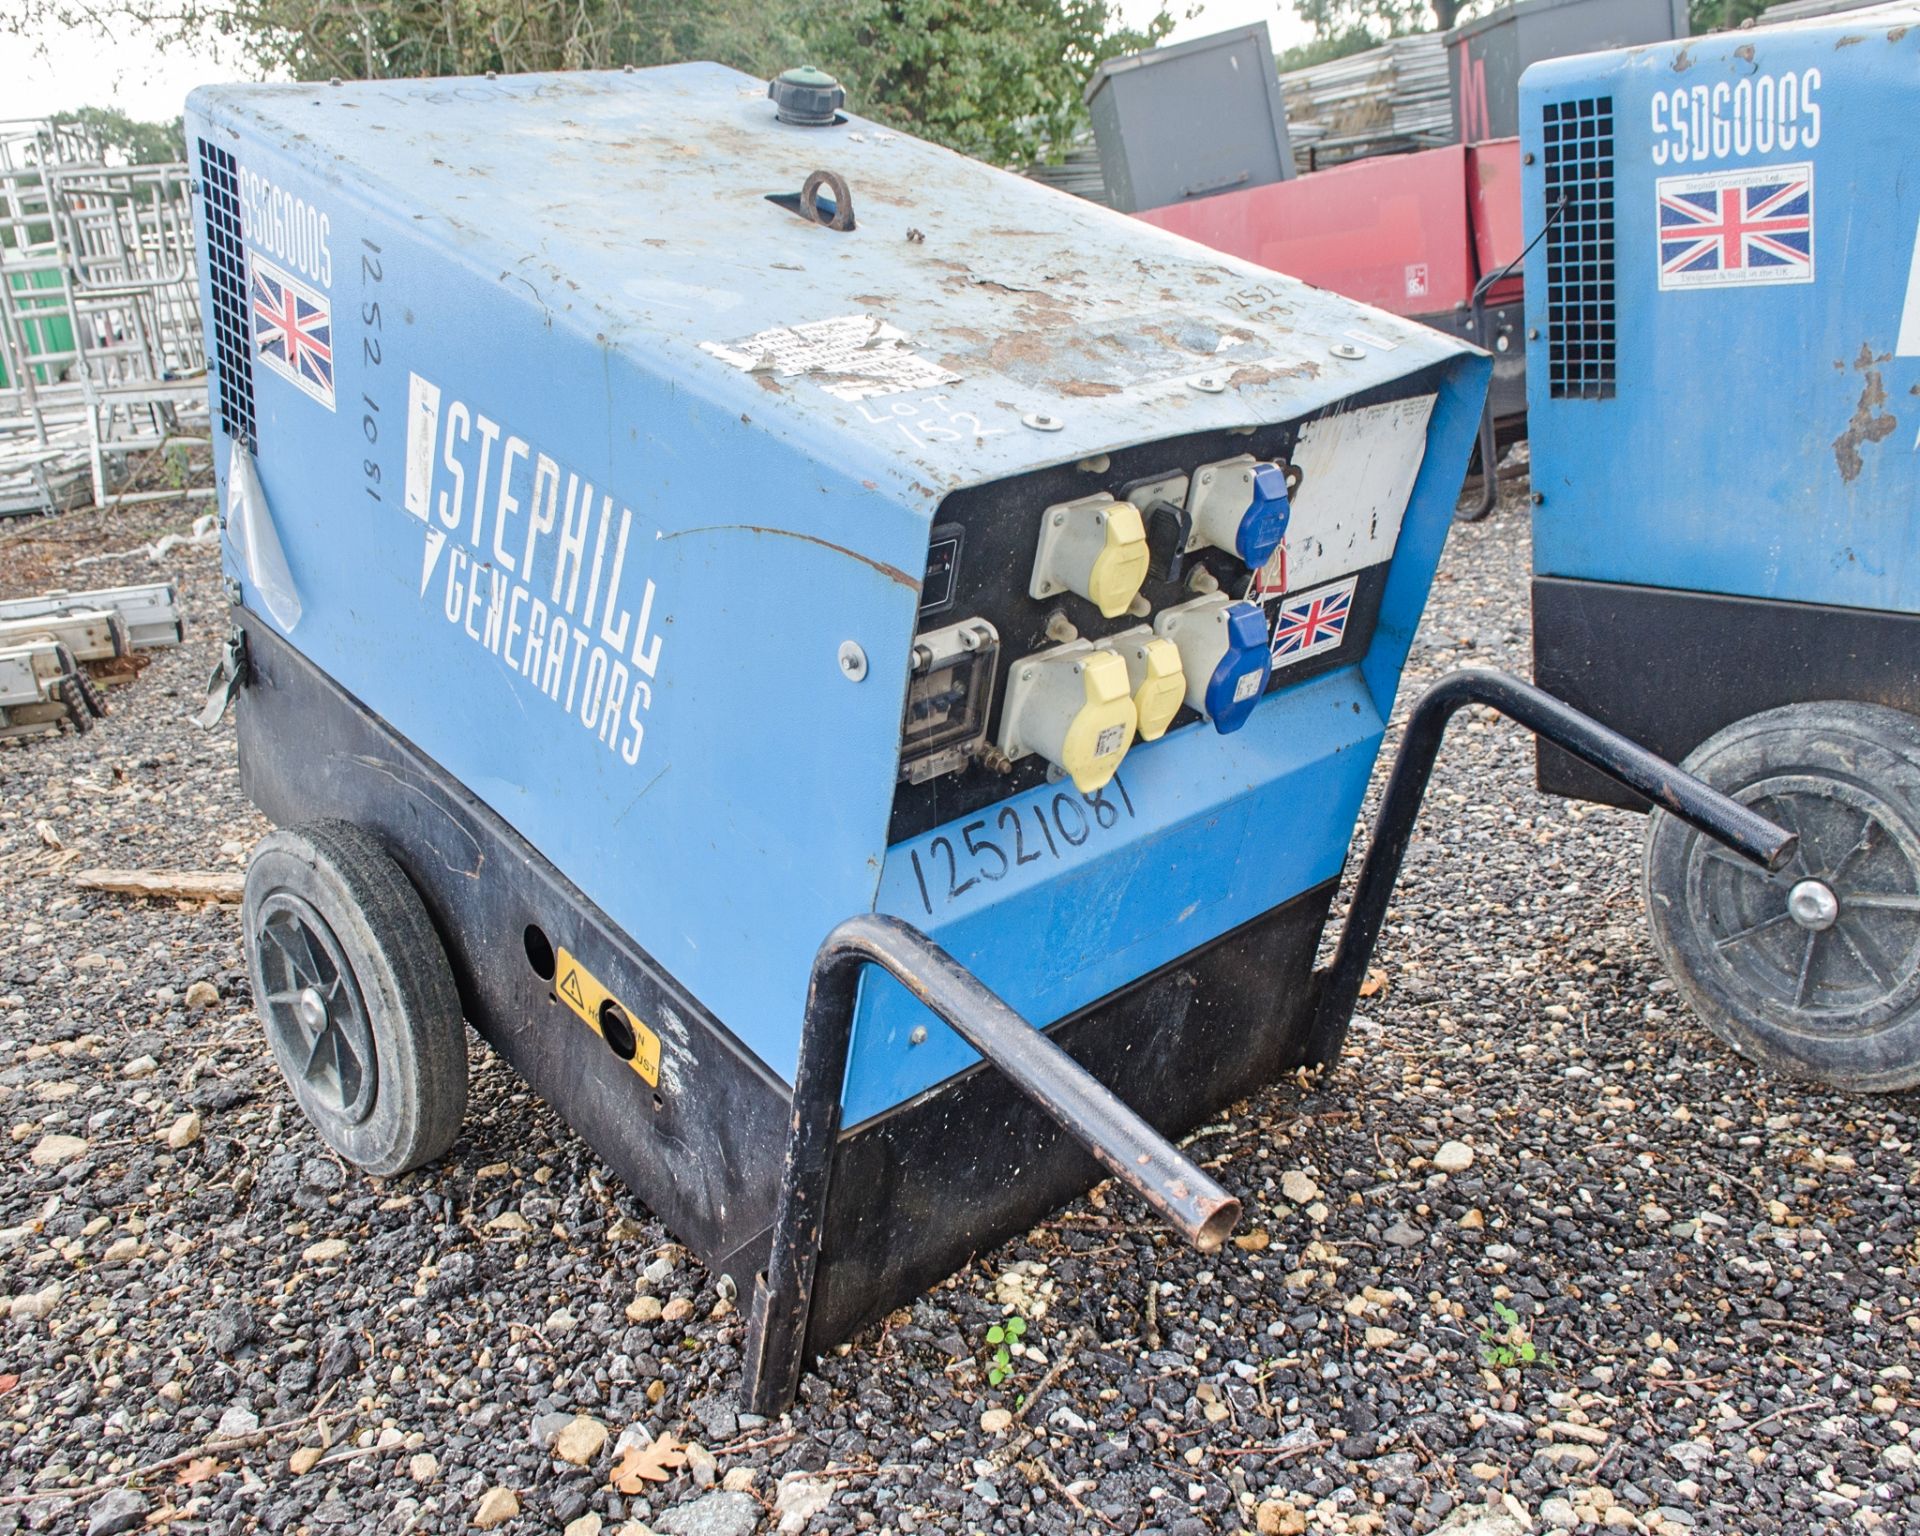 Stephill SSD6000S 6 kva diesel driven generator Recorded Hours: 2752 12521081